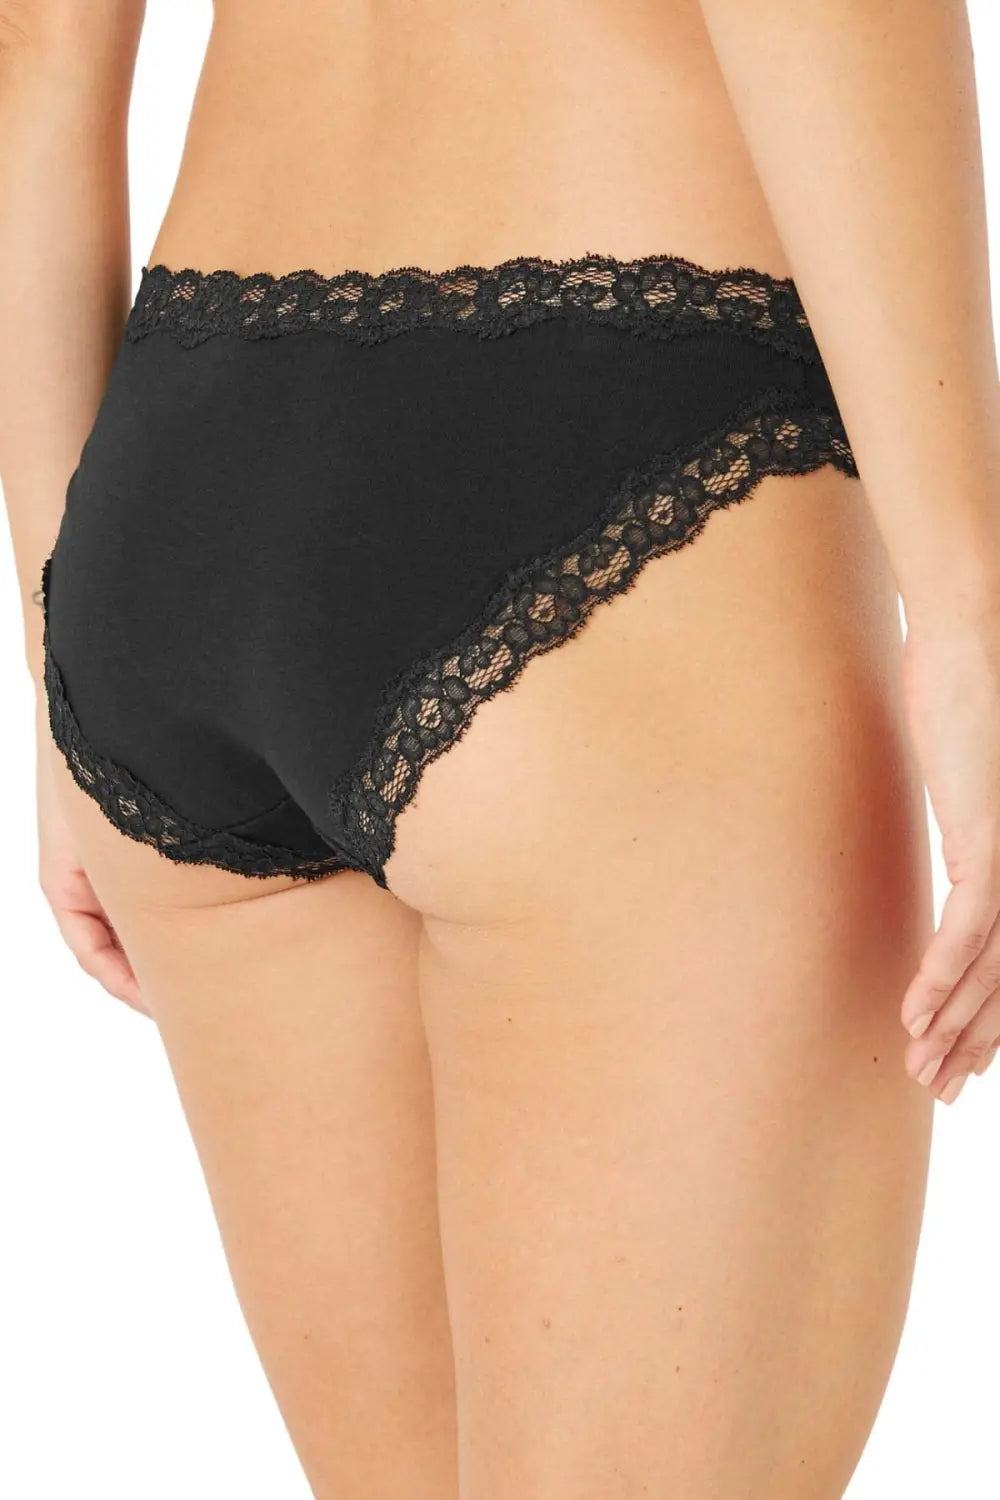 M&S Lace Knickers Black White (4 Pack)